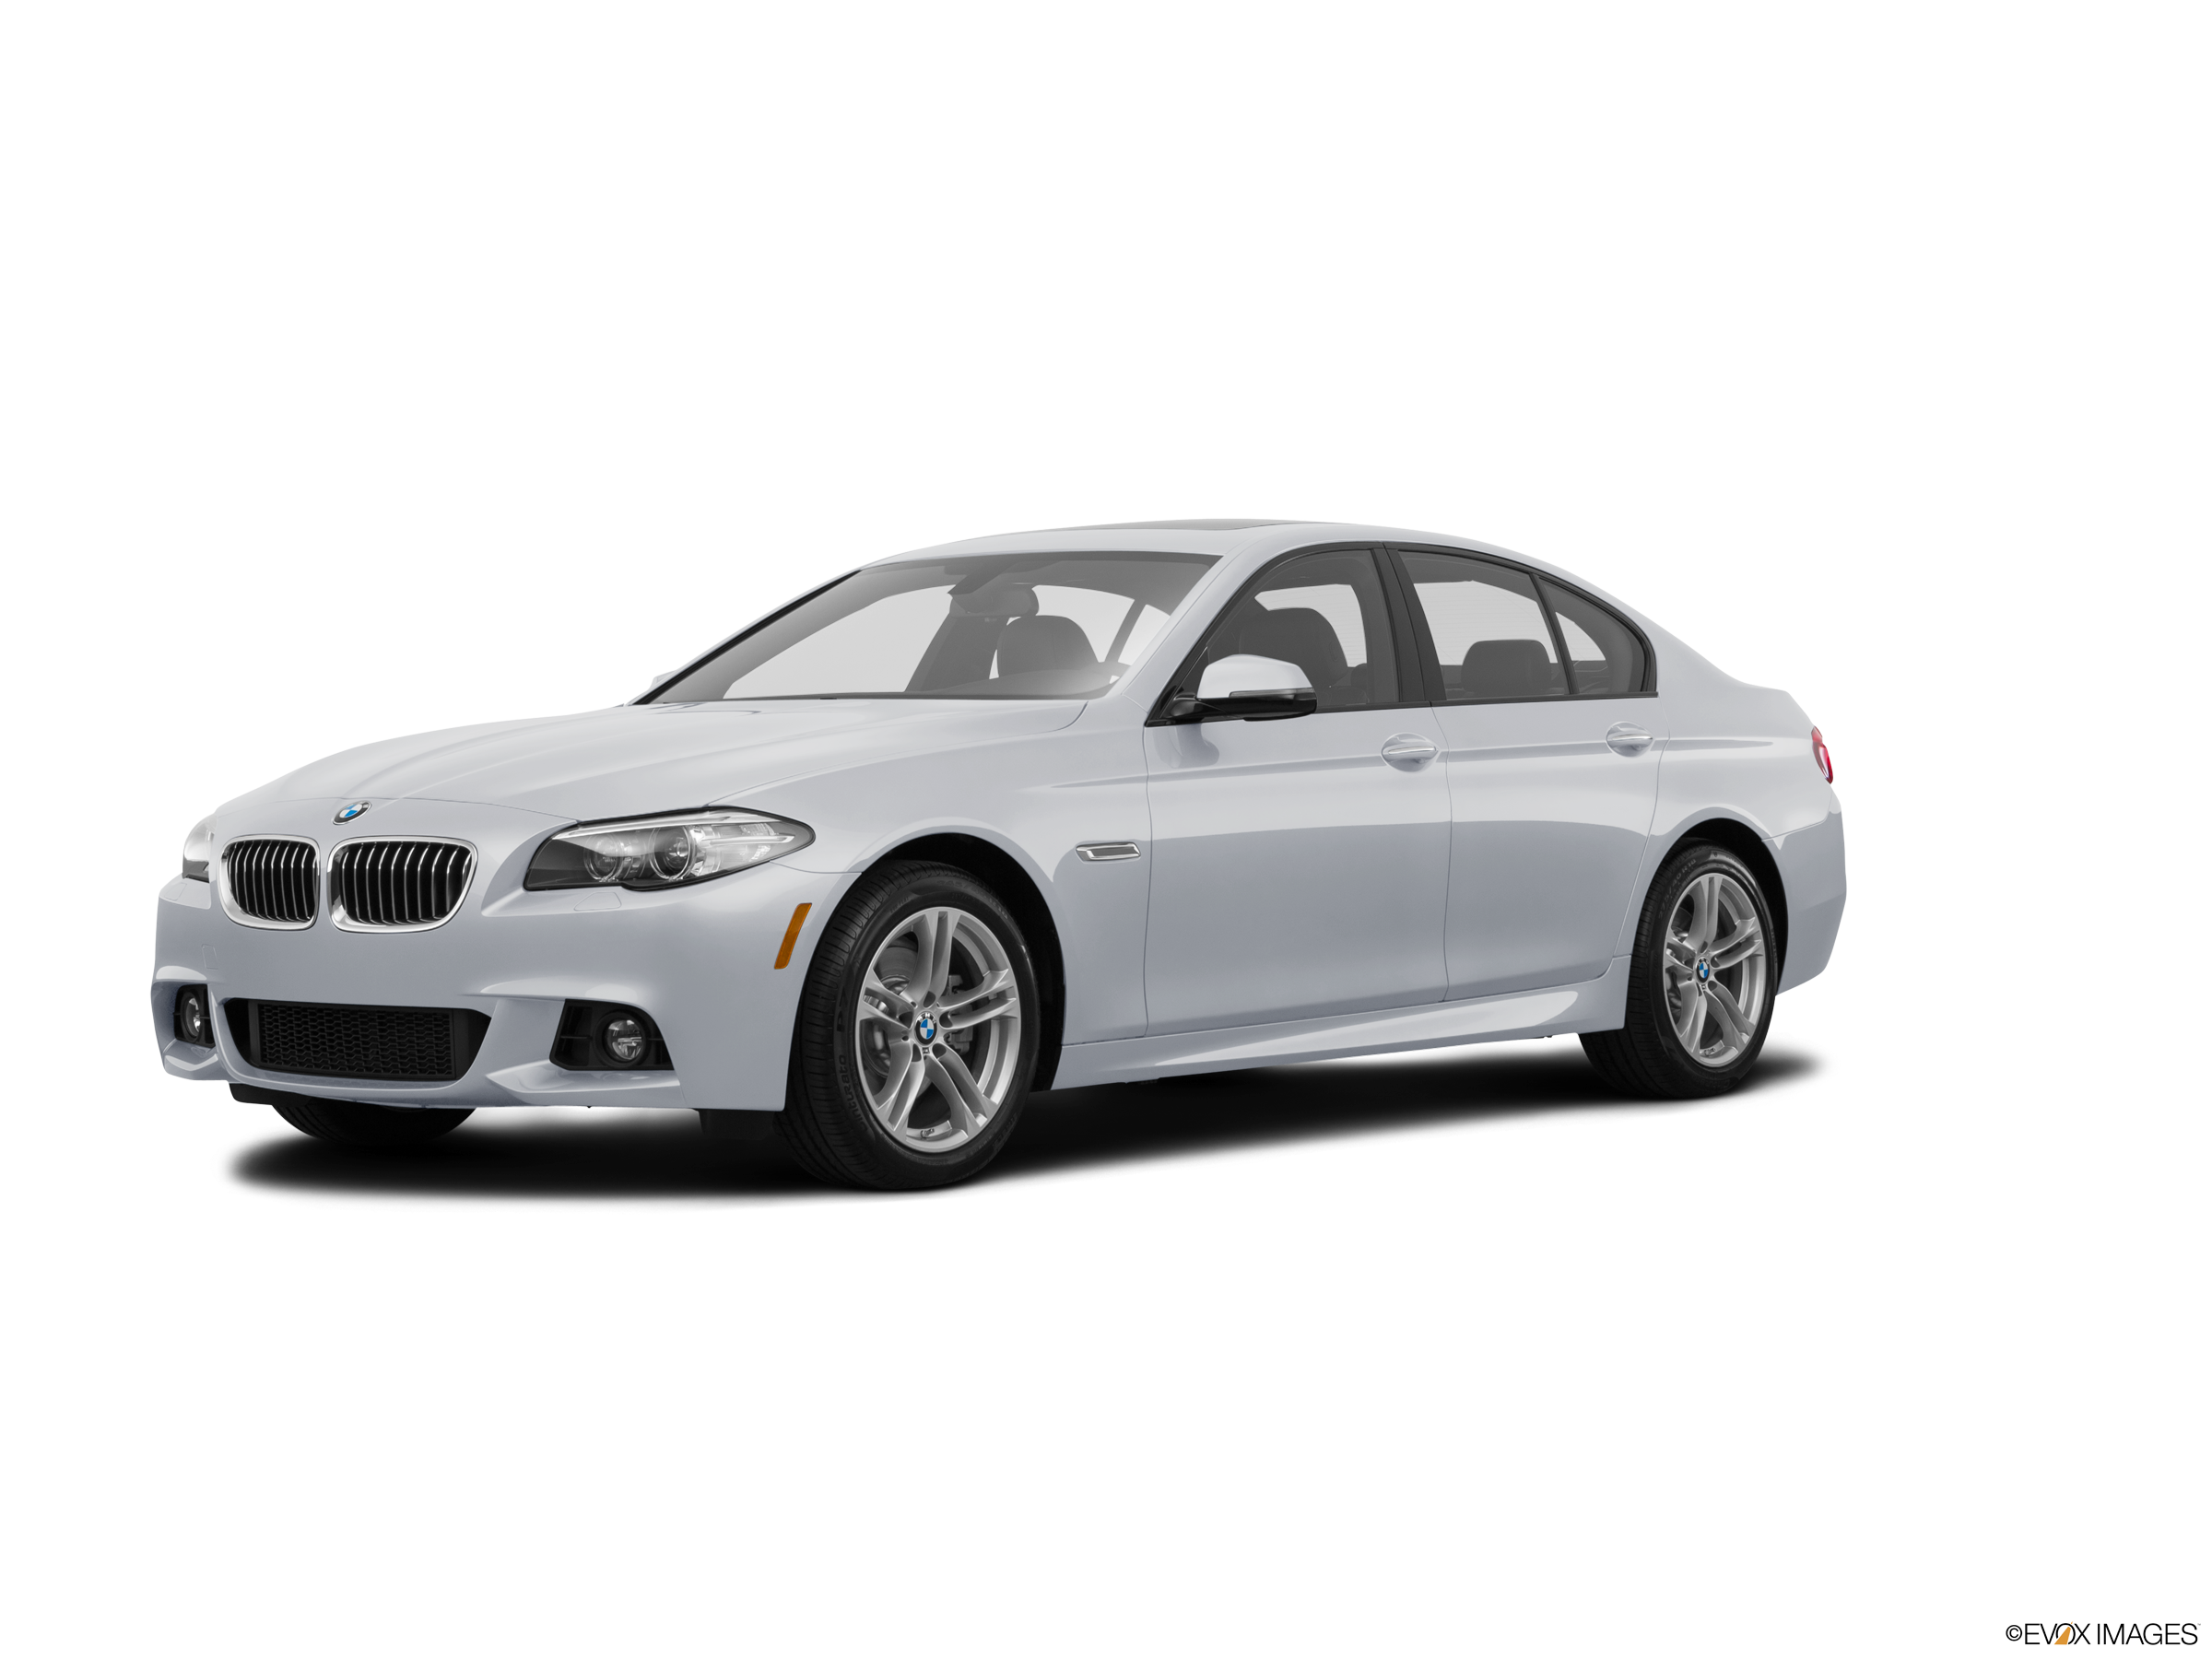 PreOwned 2016 BMW 5 Series 528i Sedan for Sale PS4692A  BMW of Murrieta